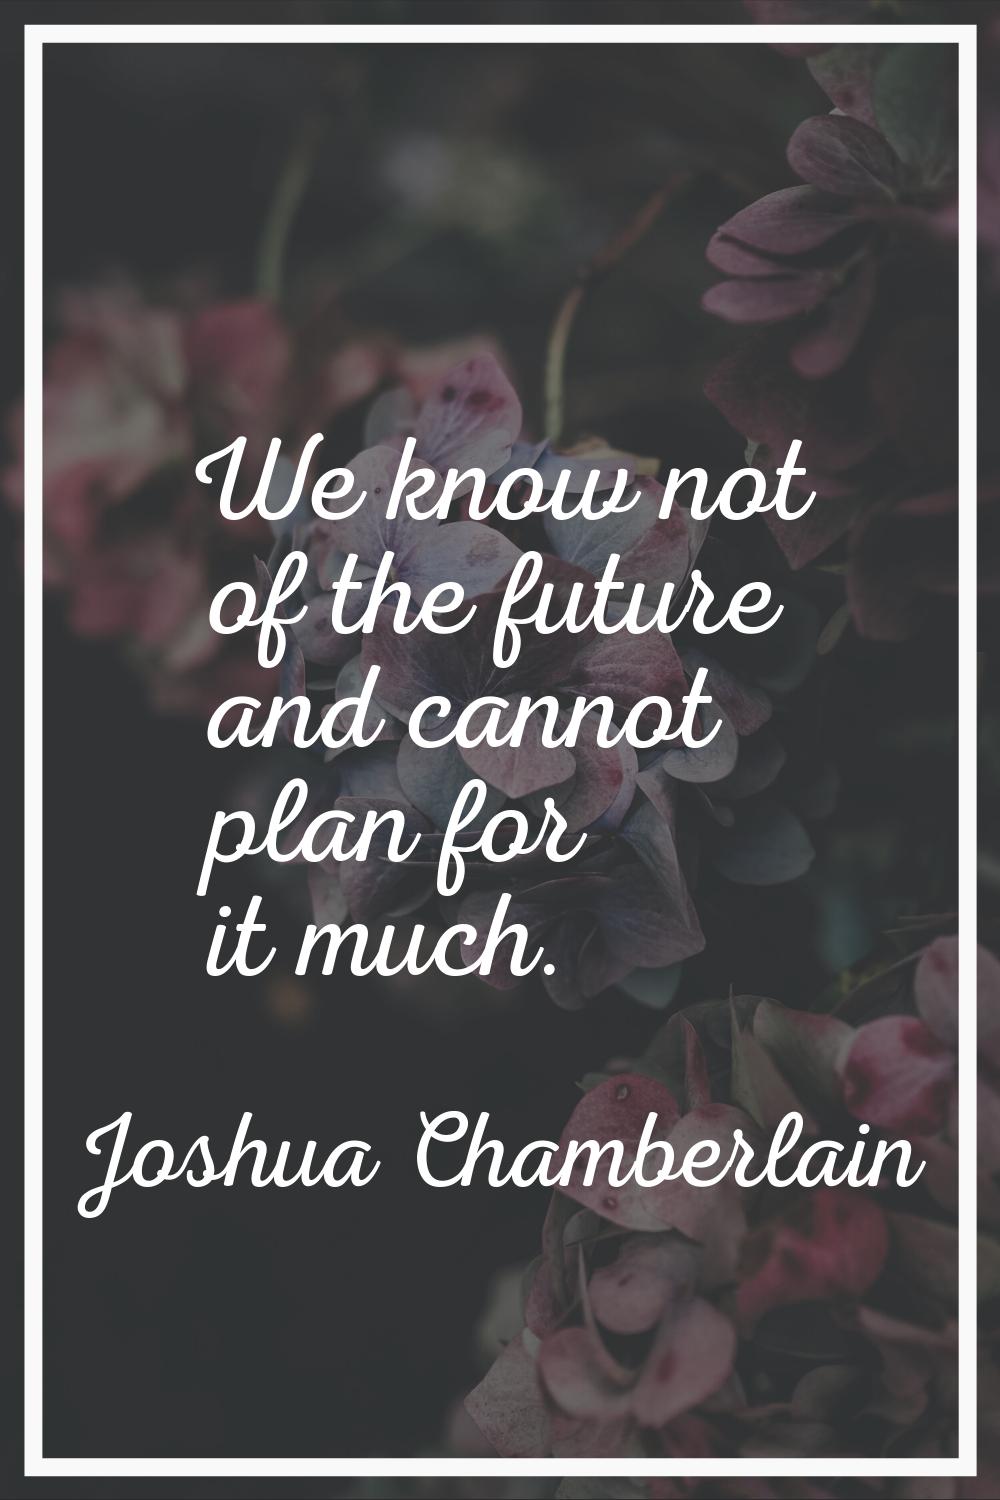 We know not of the future and cannot plan for it much.